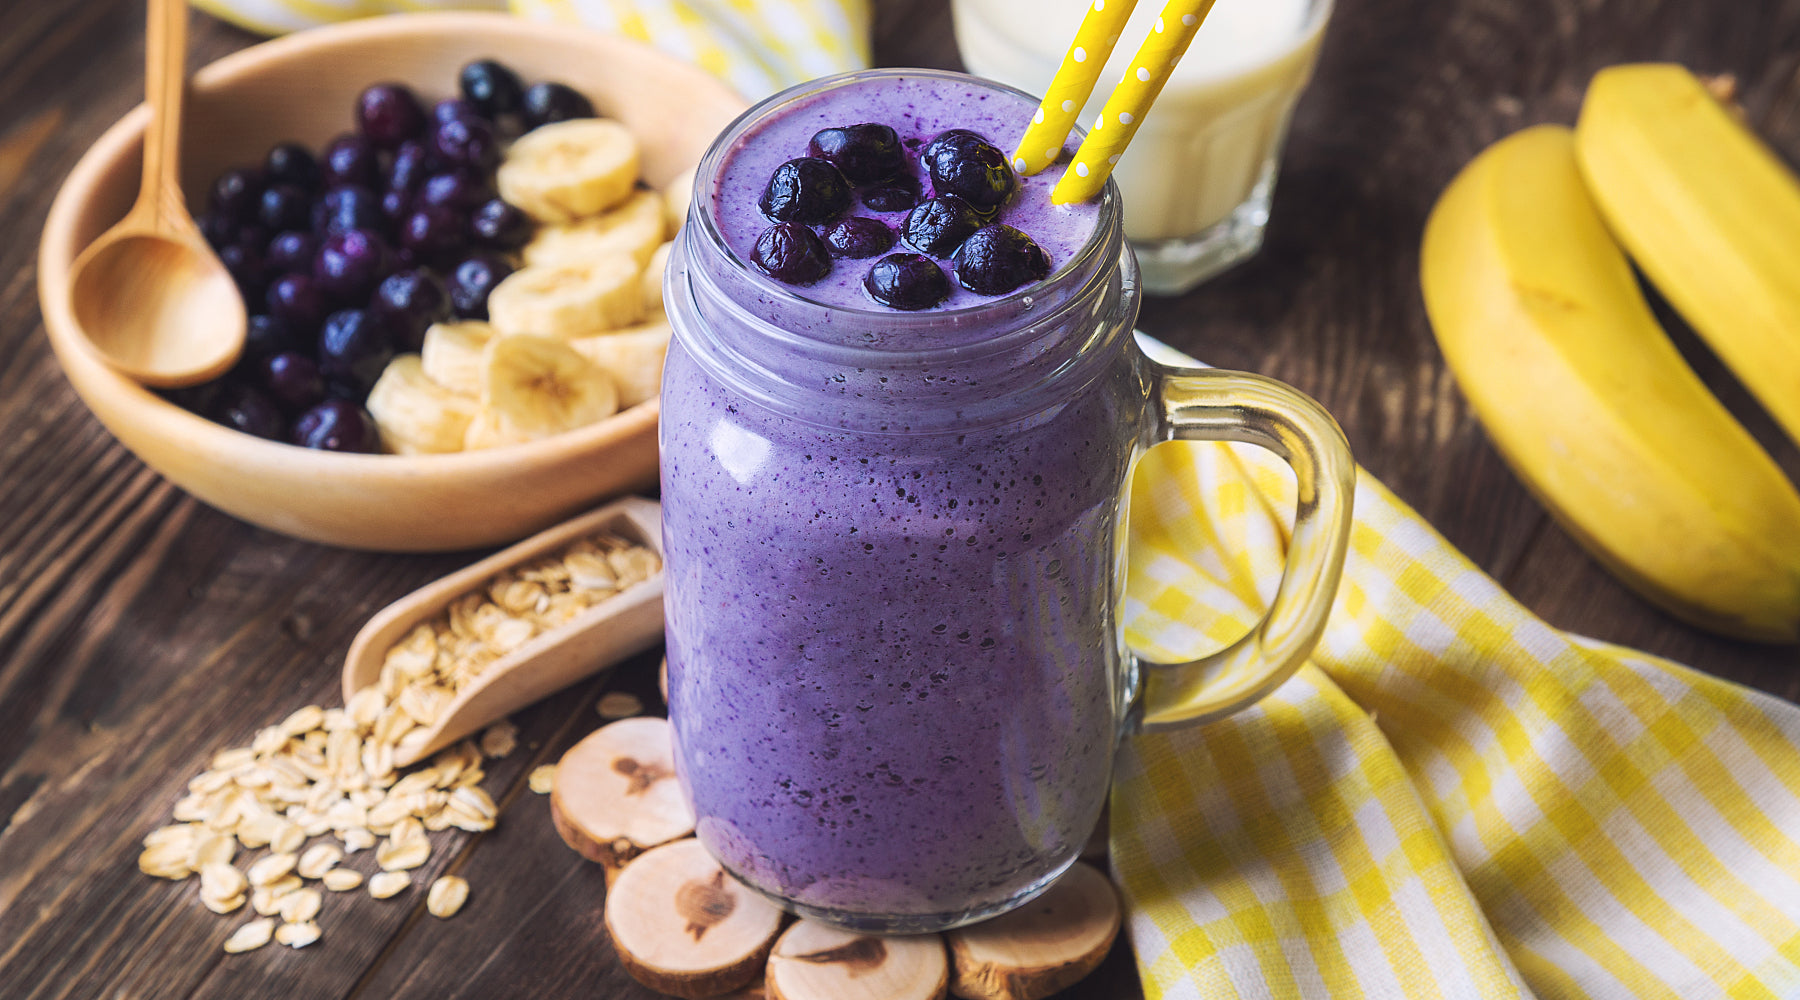 An east to digest, balanced smoothie is a great breakfast option